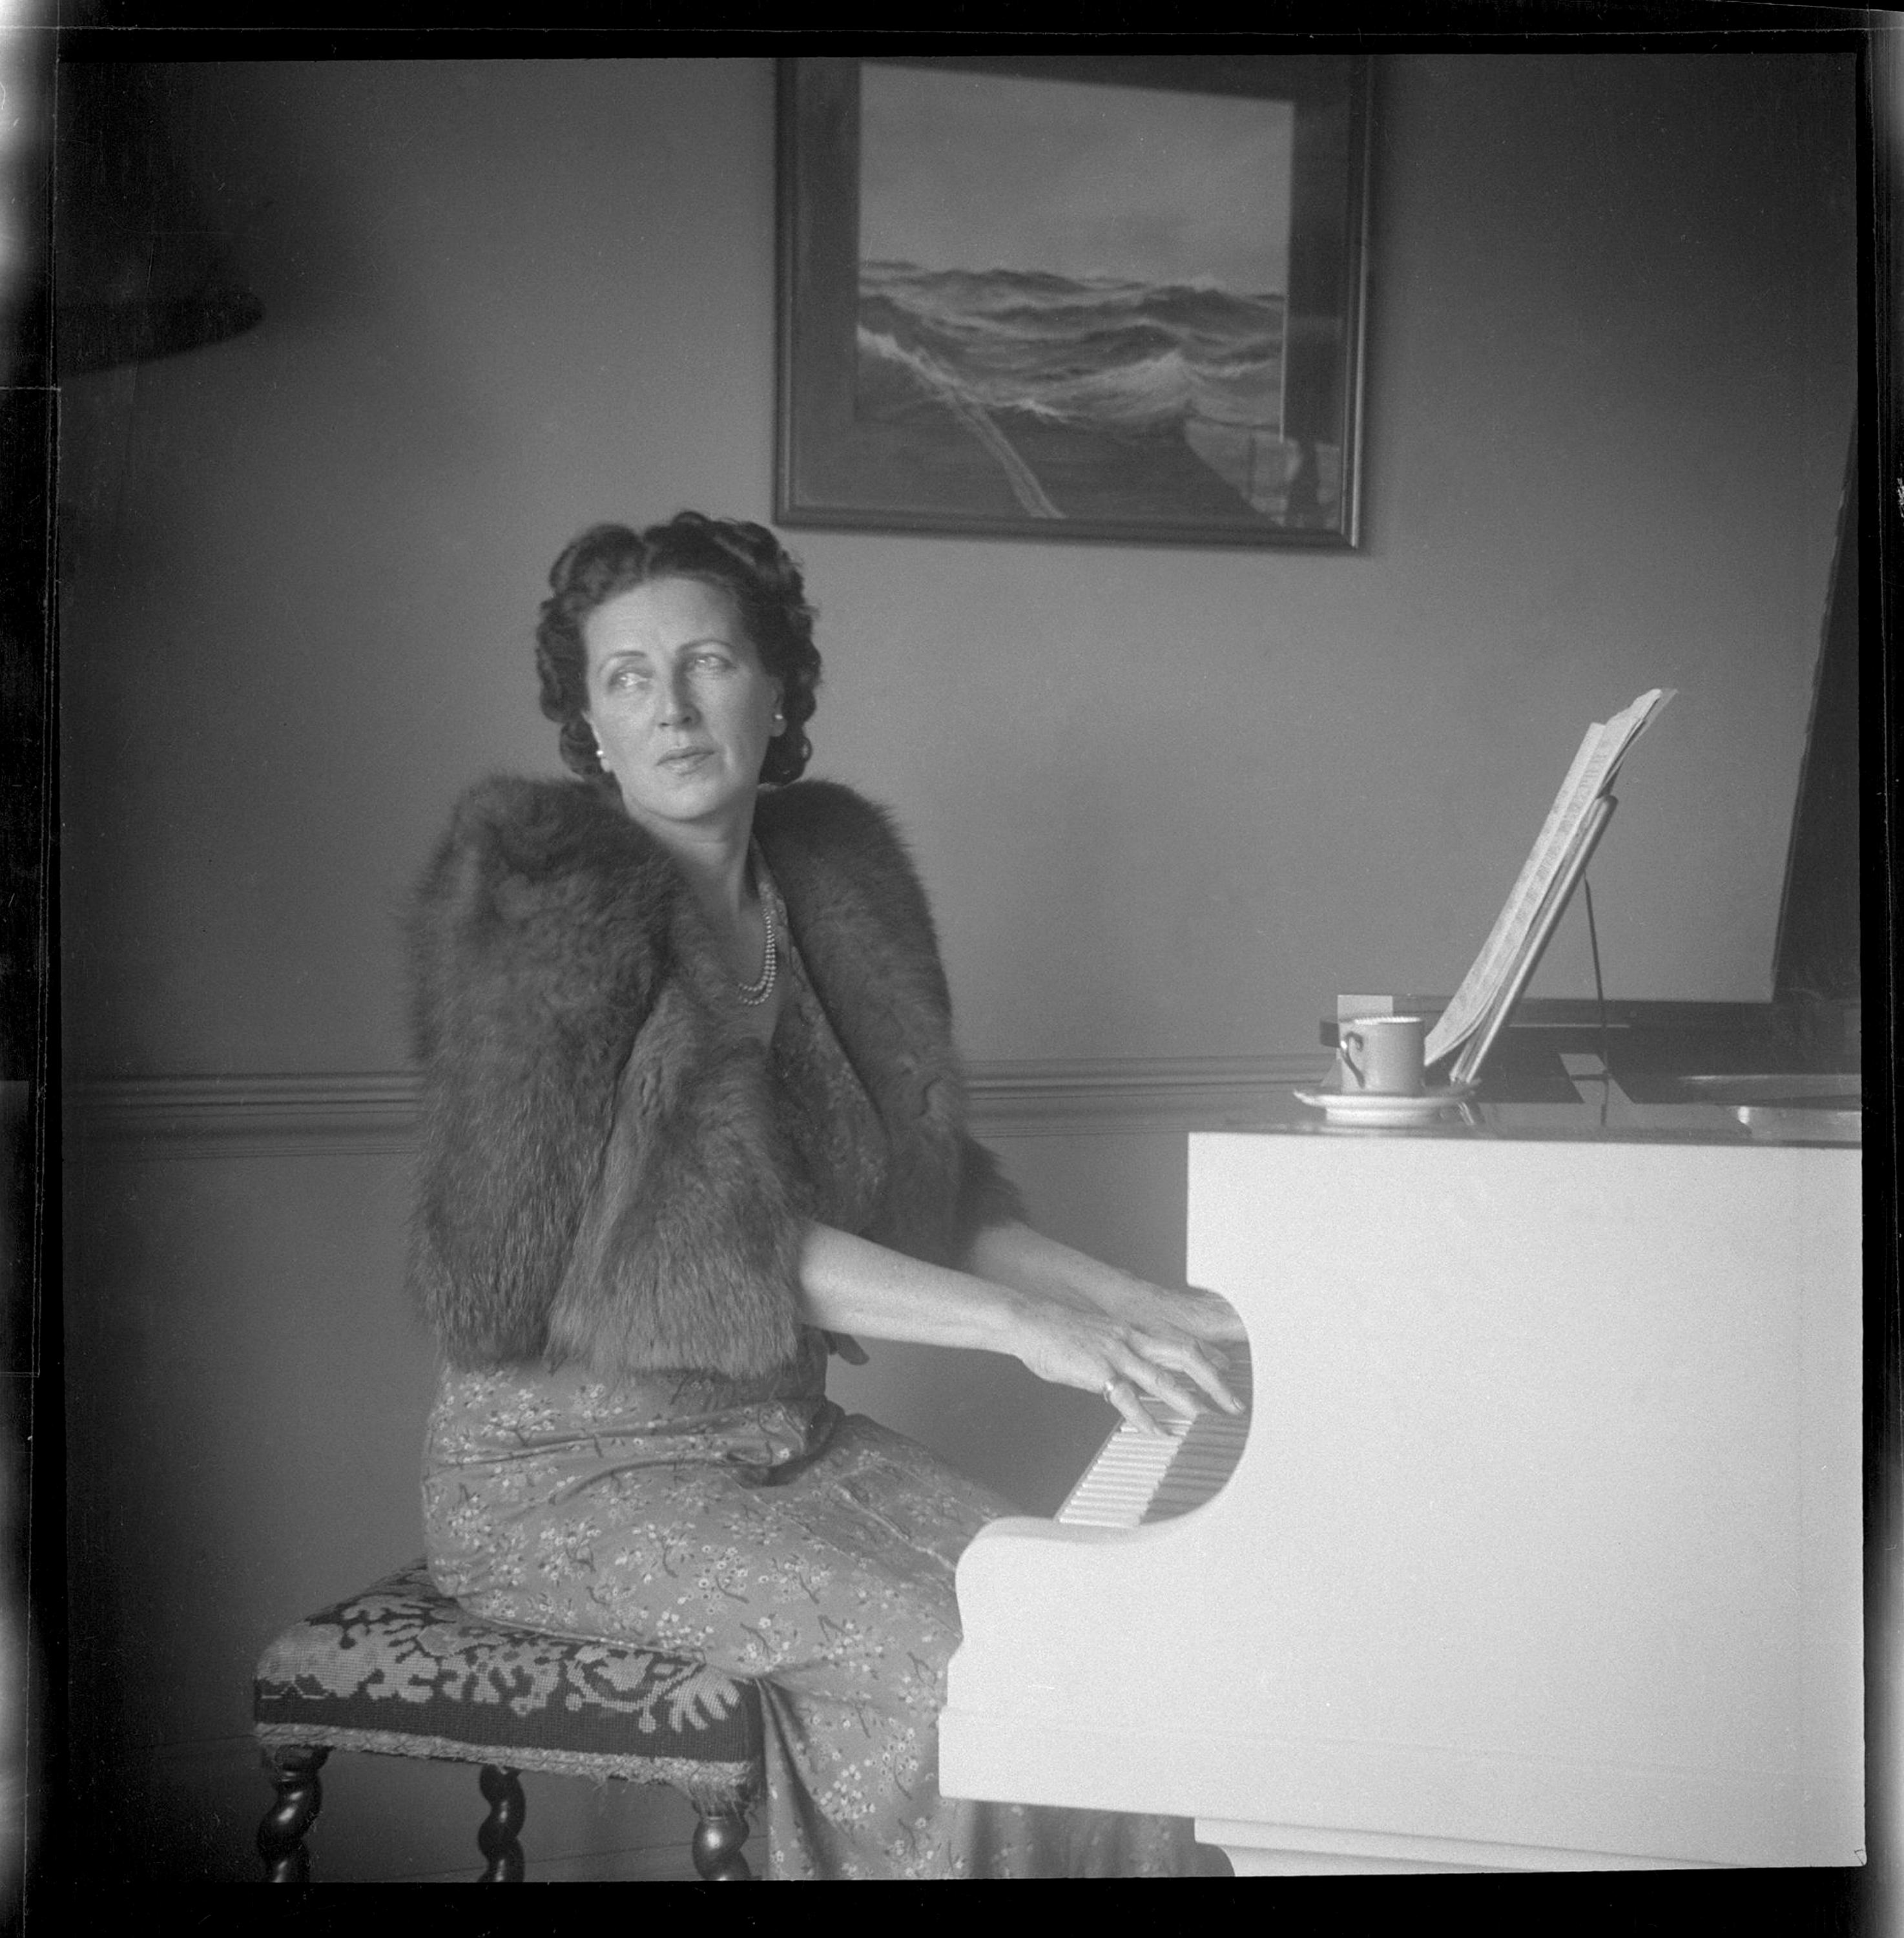 Dora Knowles Davies playing piano at home no.1 St Swithun Street, Winchester, around 1943 / photographer unknown